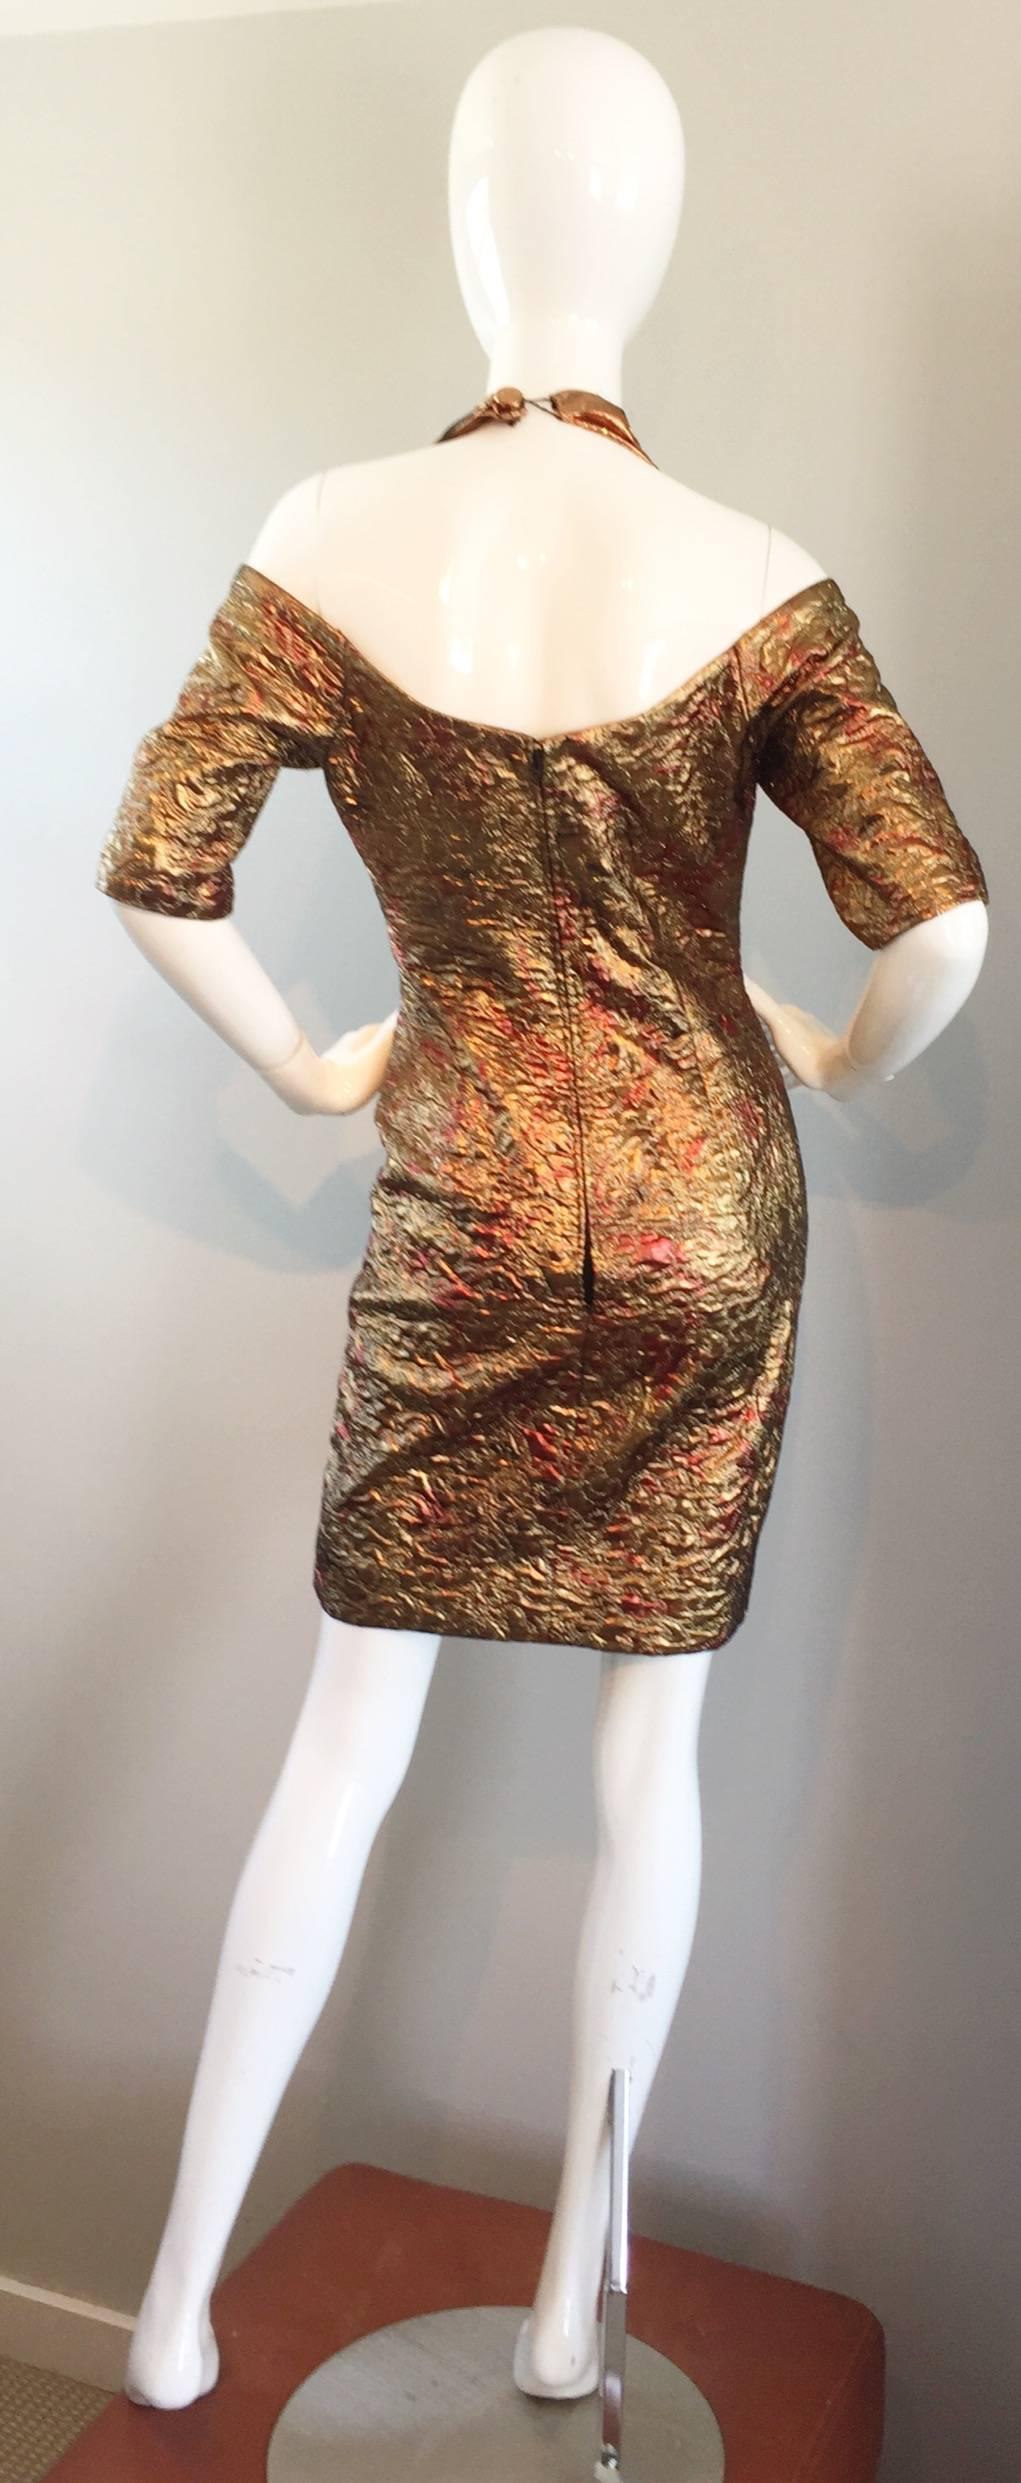 Sexy 1990s Bronze + Gold + Rose Gold Silk Brocade Vintage Halter Bod Con Dress In Excellent Condition For Sale In San Diego, CA